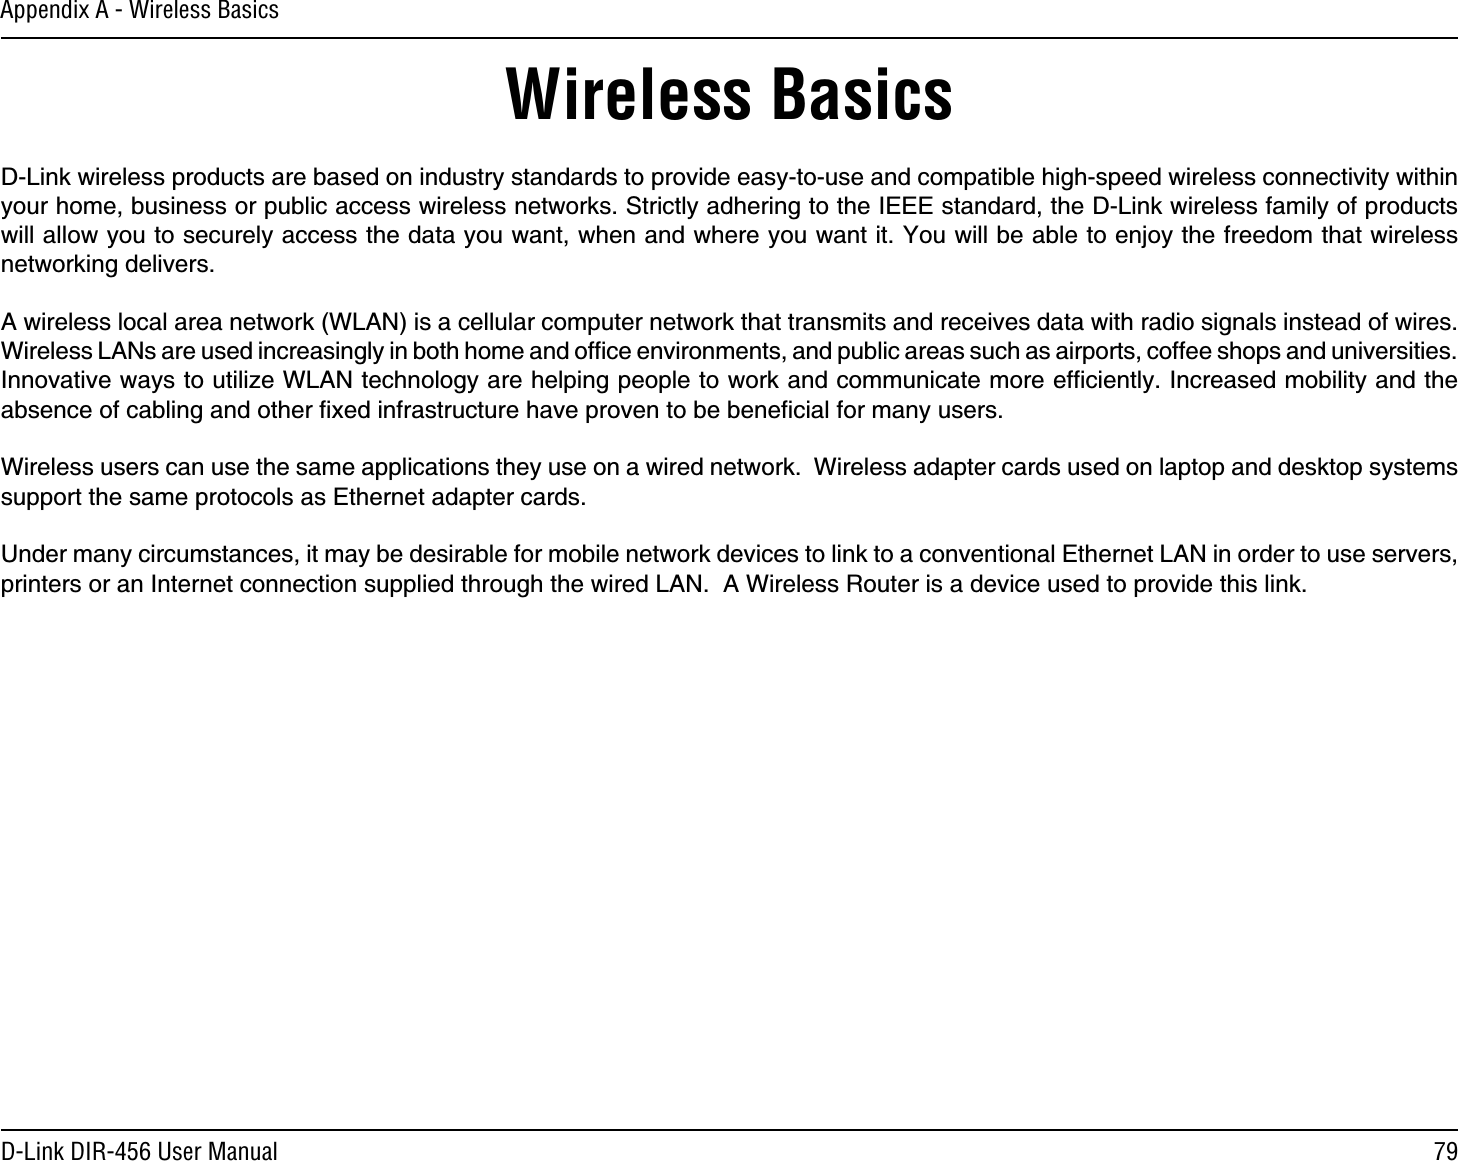 79D-Link DIR-456 User ManualAppendix A - Wireless BasicsD-Link wireless products are based on industry standards to provide easy-to-use and compatible high-speed wireless connectivity within your home, business or public access wireless networks. Strictly adhering to the IEEE standard, the D-Link wireless family of products will allow you to securely access the data you want, when and where you want it. You will be able to enjoy the freedom that wireless networking delivers.A wireless local area network (WLAN) is a cellular computer network that transmits and receives data with radio signals instead of wires. Wireless LANs are used increasingly in both home and ofﬁce environments, and public areas such as airports, coffee shops and universities. Innovative ways to utilize WLAN technology are helping people to work and communicate more efﬁciently. Increased mobility and the absence of cabling and other ﬁxed infrastructure have proven to be beneﬁcial for many users. Wireless users can use the same applications they use on a wired network.  Wireless adapter cards used on laptop and desktop systems support the same protocols as Ethernet adapter cards. Under many circumstances, it may be desirable for mobile network devices to link to a conventional Ethernet LAN in order to use servers, printers or an Internet connection supplied through the wired LAN.  A Wireless Router is a device used to provide this link.Wireless Basics